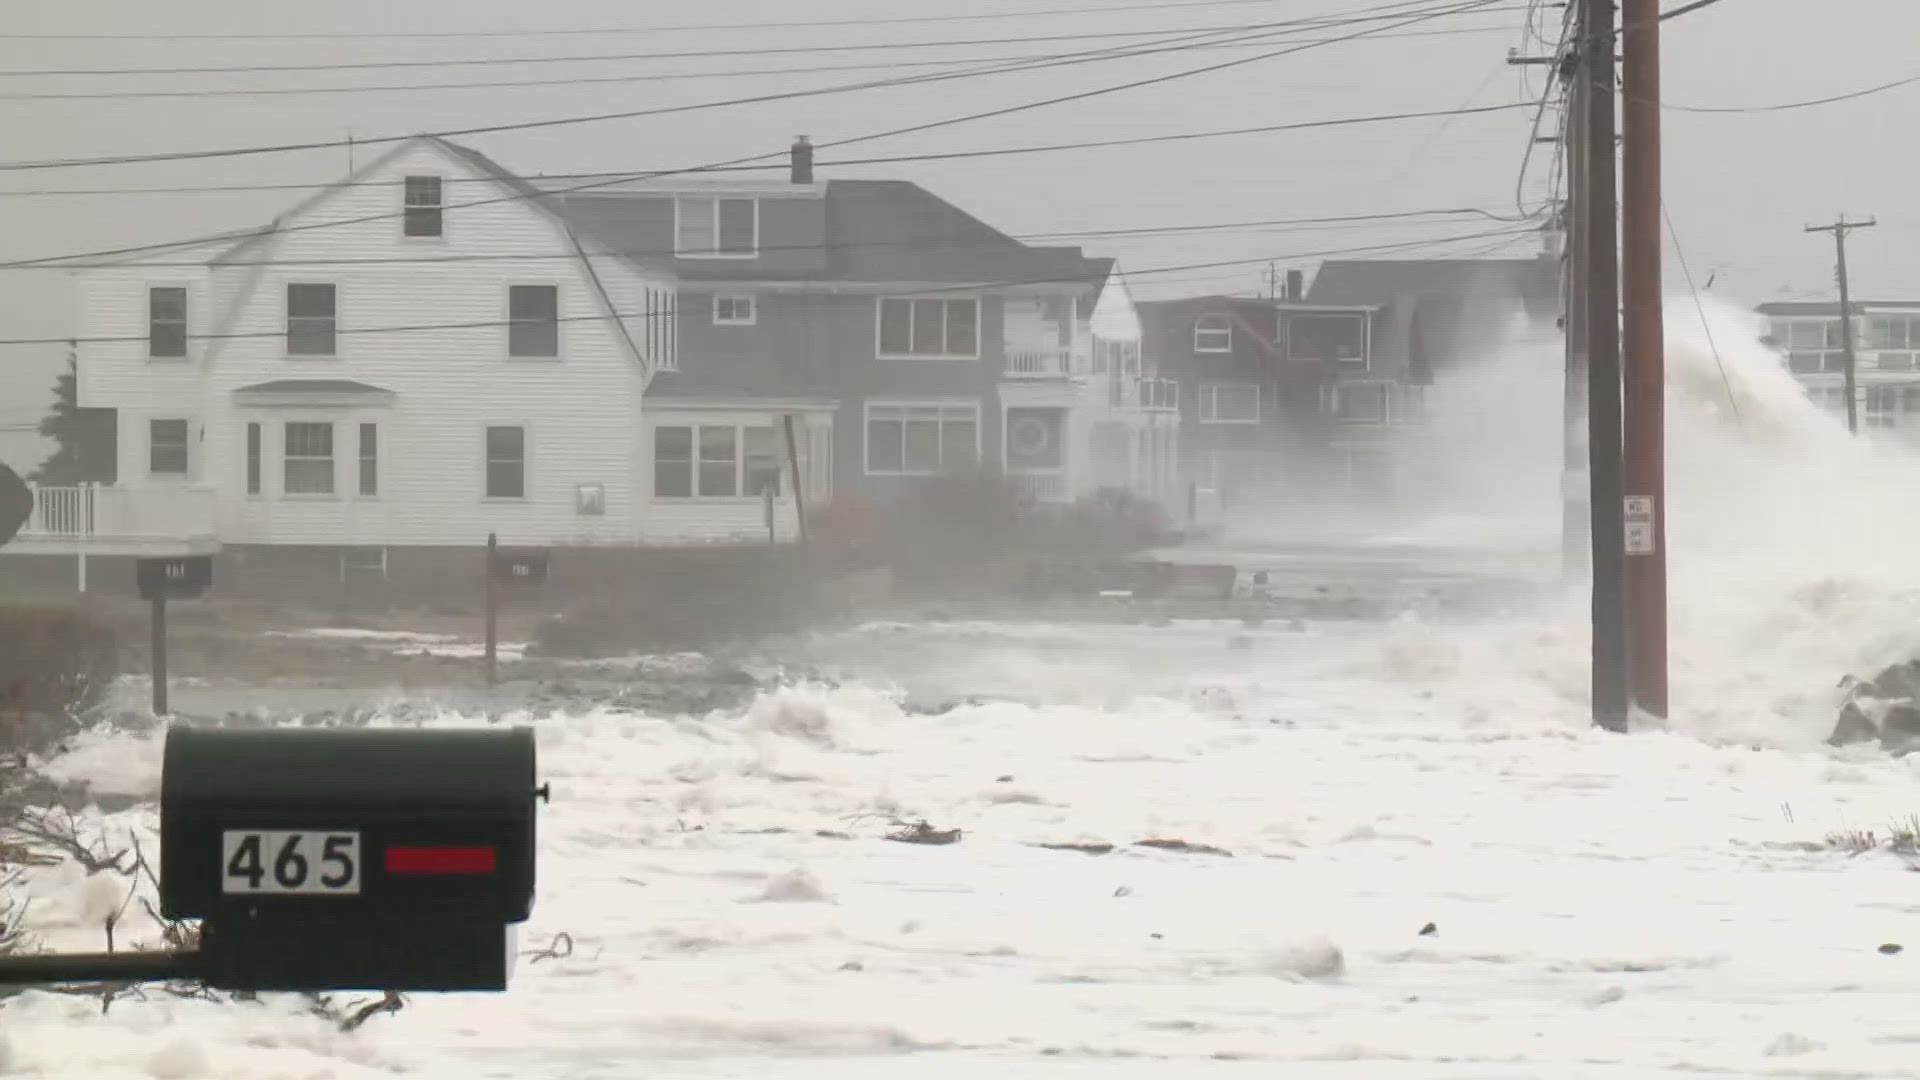 "When the tides come up now, you only got about 35 feet of sand. Last year we had about 70," one Saco resident said.